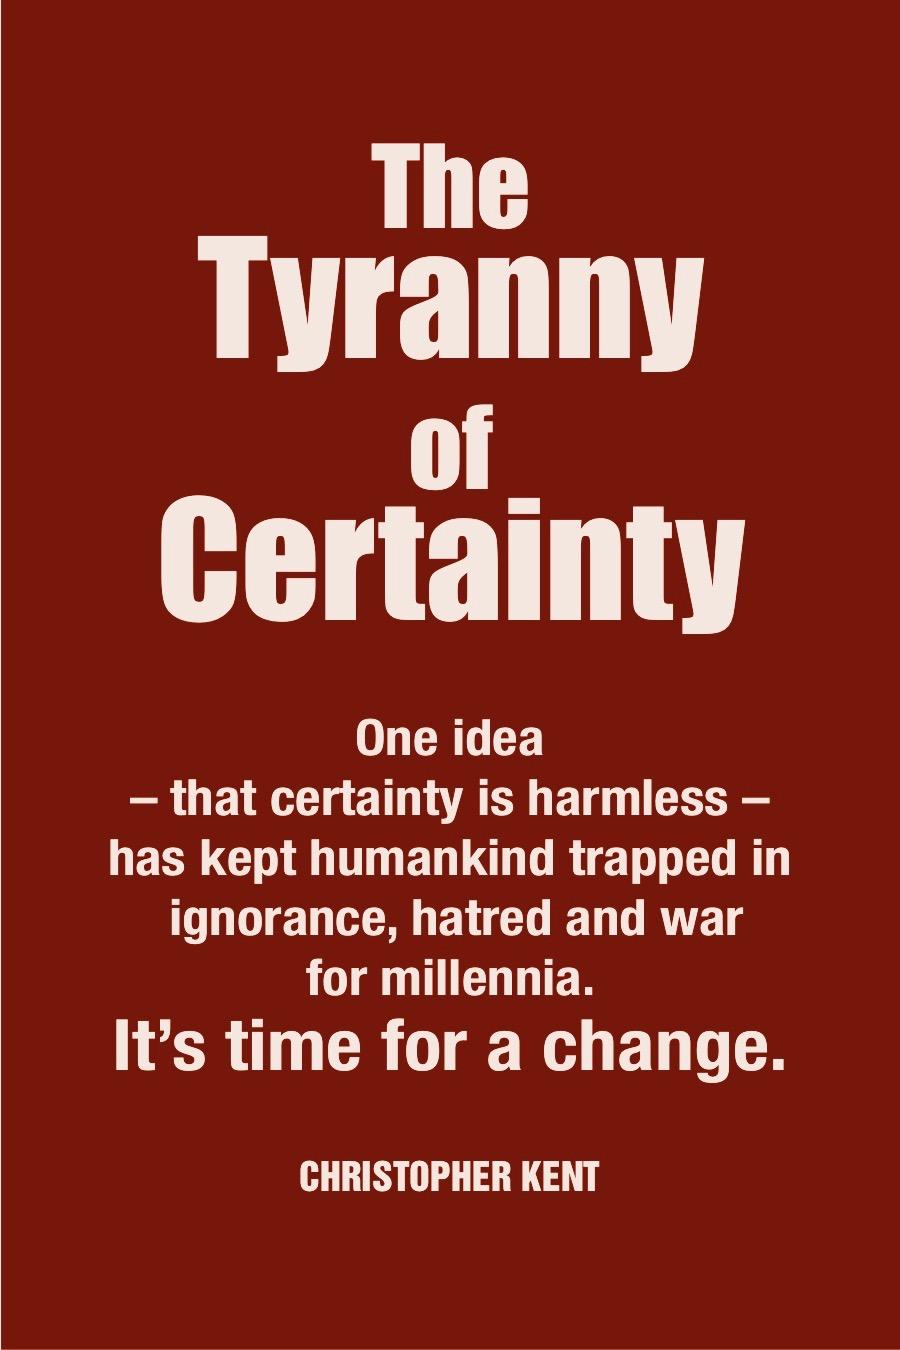 The Tyranny of Certainty (coming soon)